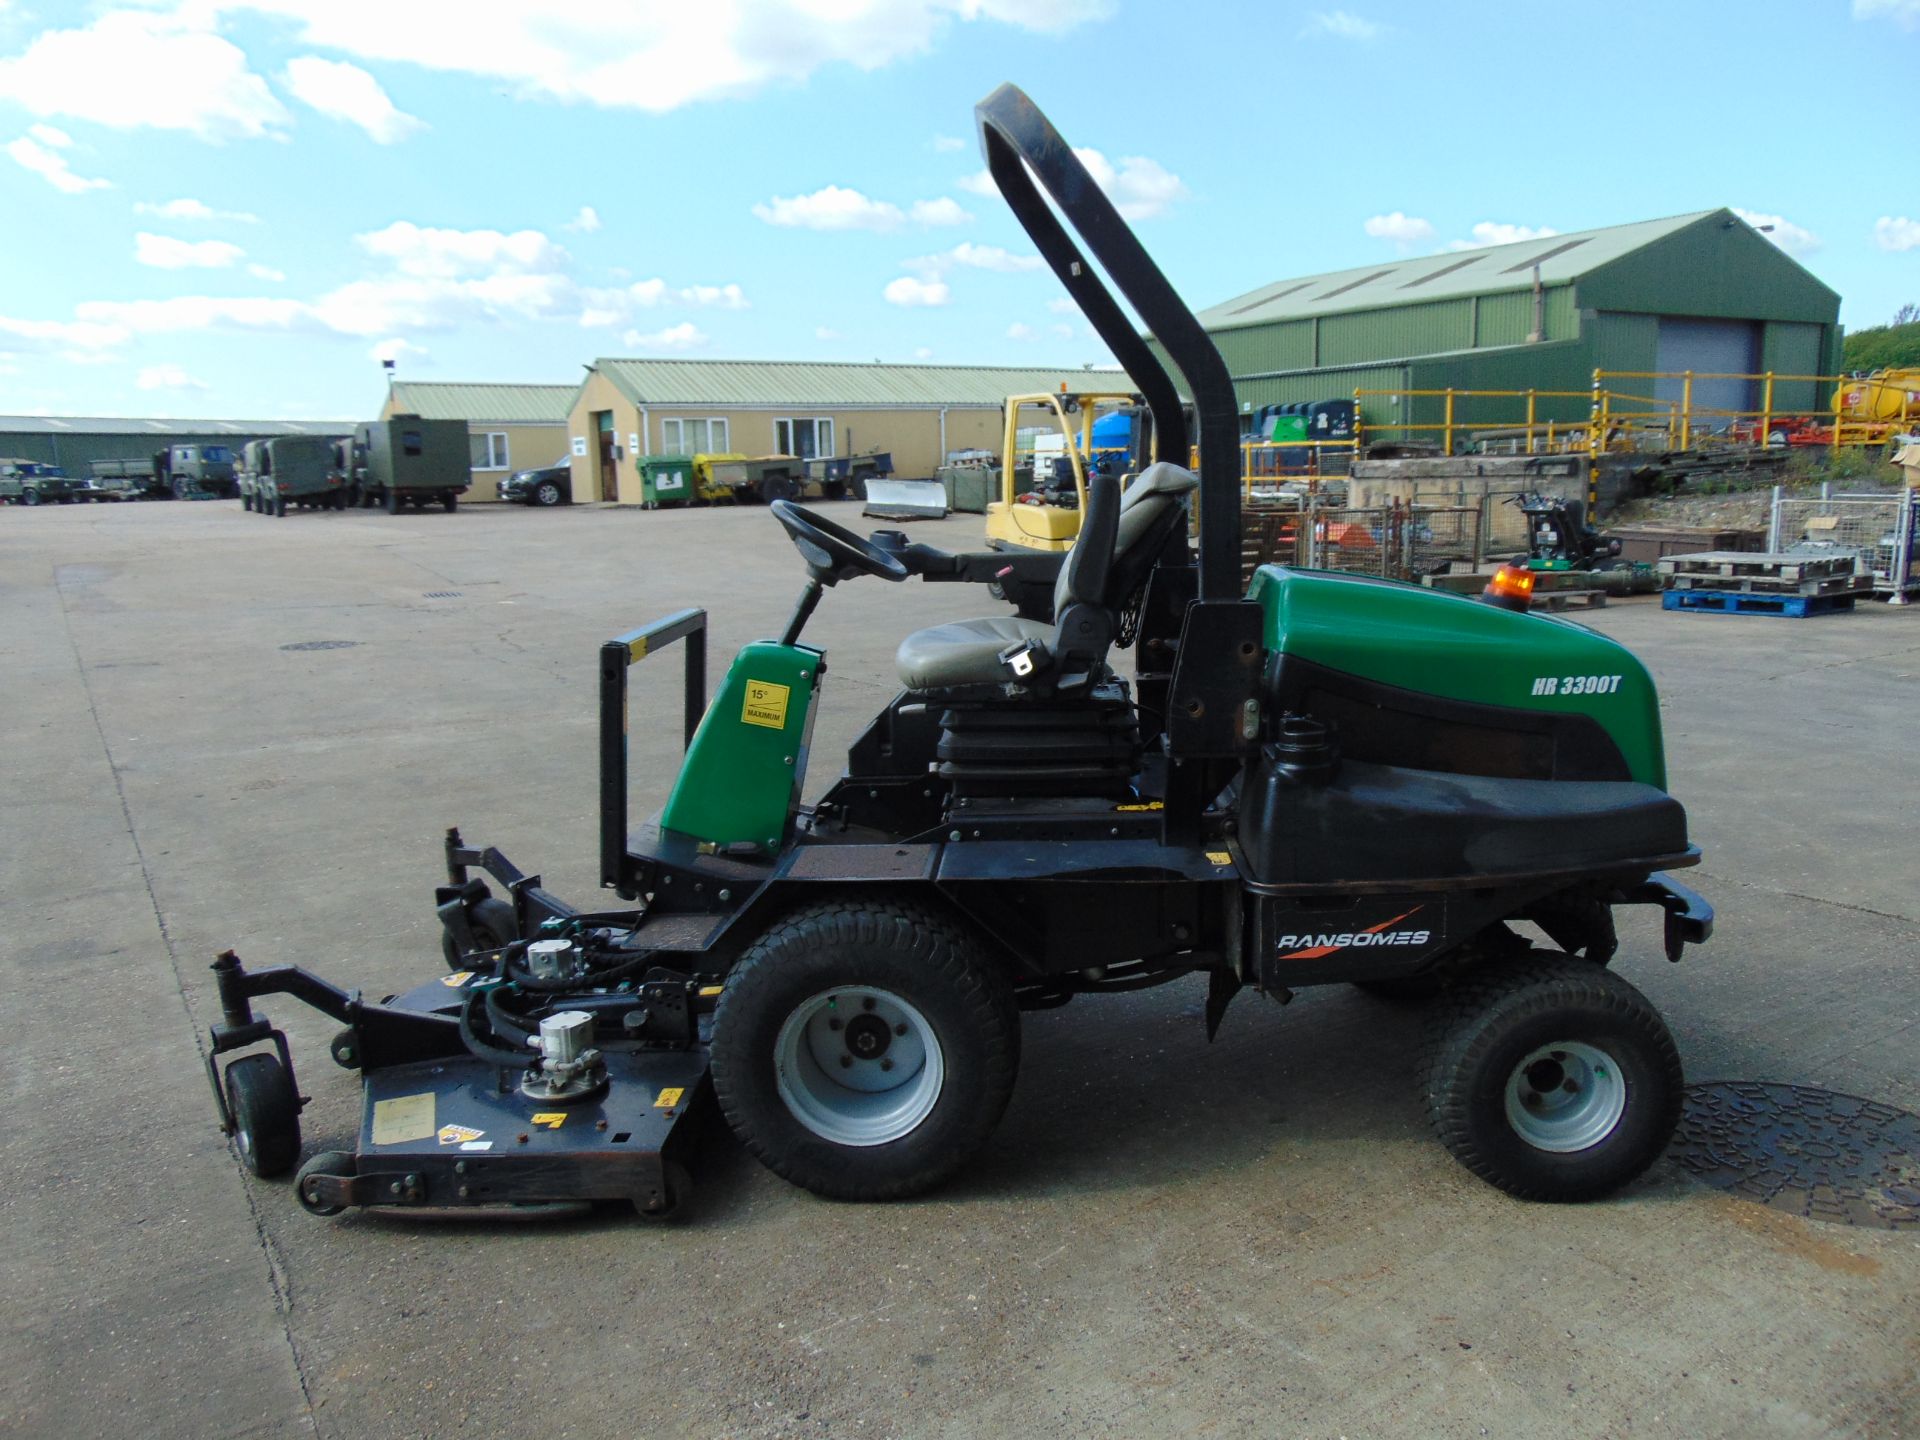 2012 Ransomes HR 3300T Outfront 3 Blade Hydraulic Rotary Mower. 4,560 hrs from UK Govt Contract. - Image 5 of 22